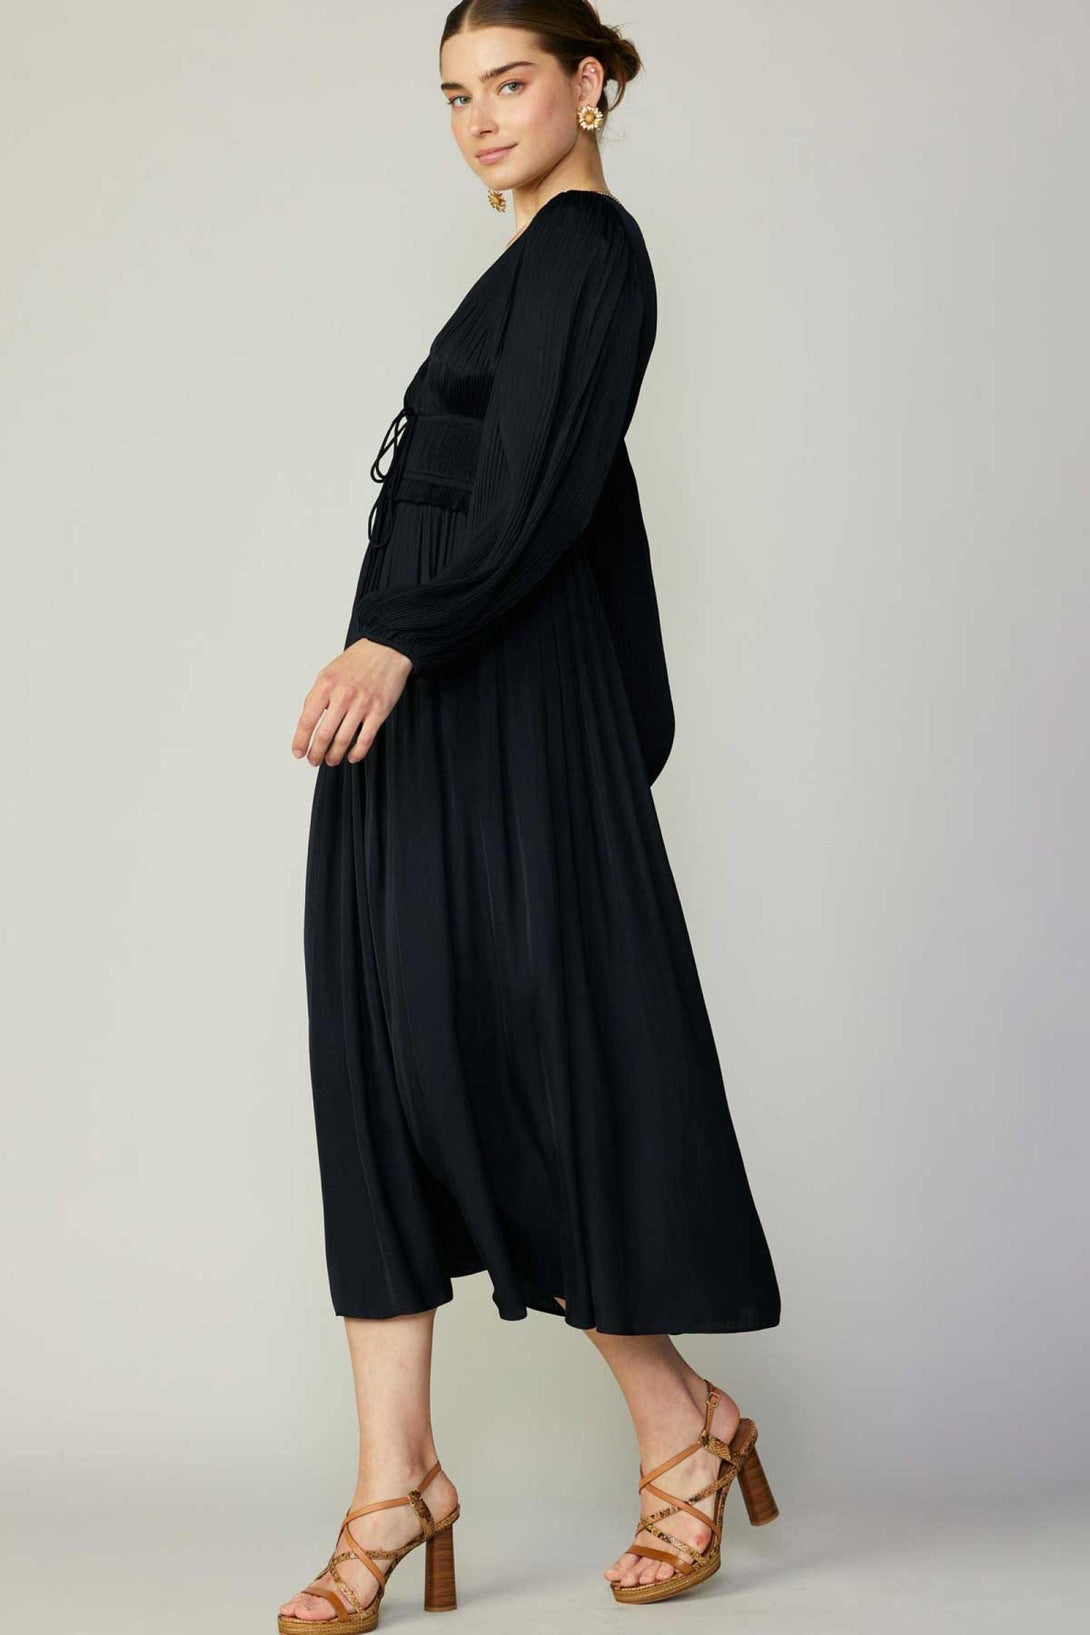 Current Air Ethereal Long Sleeve Dress